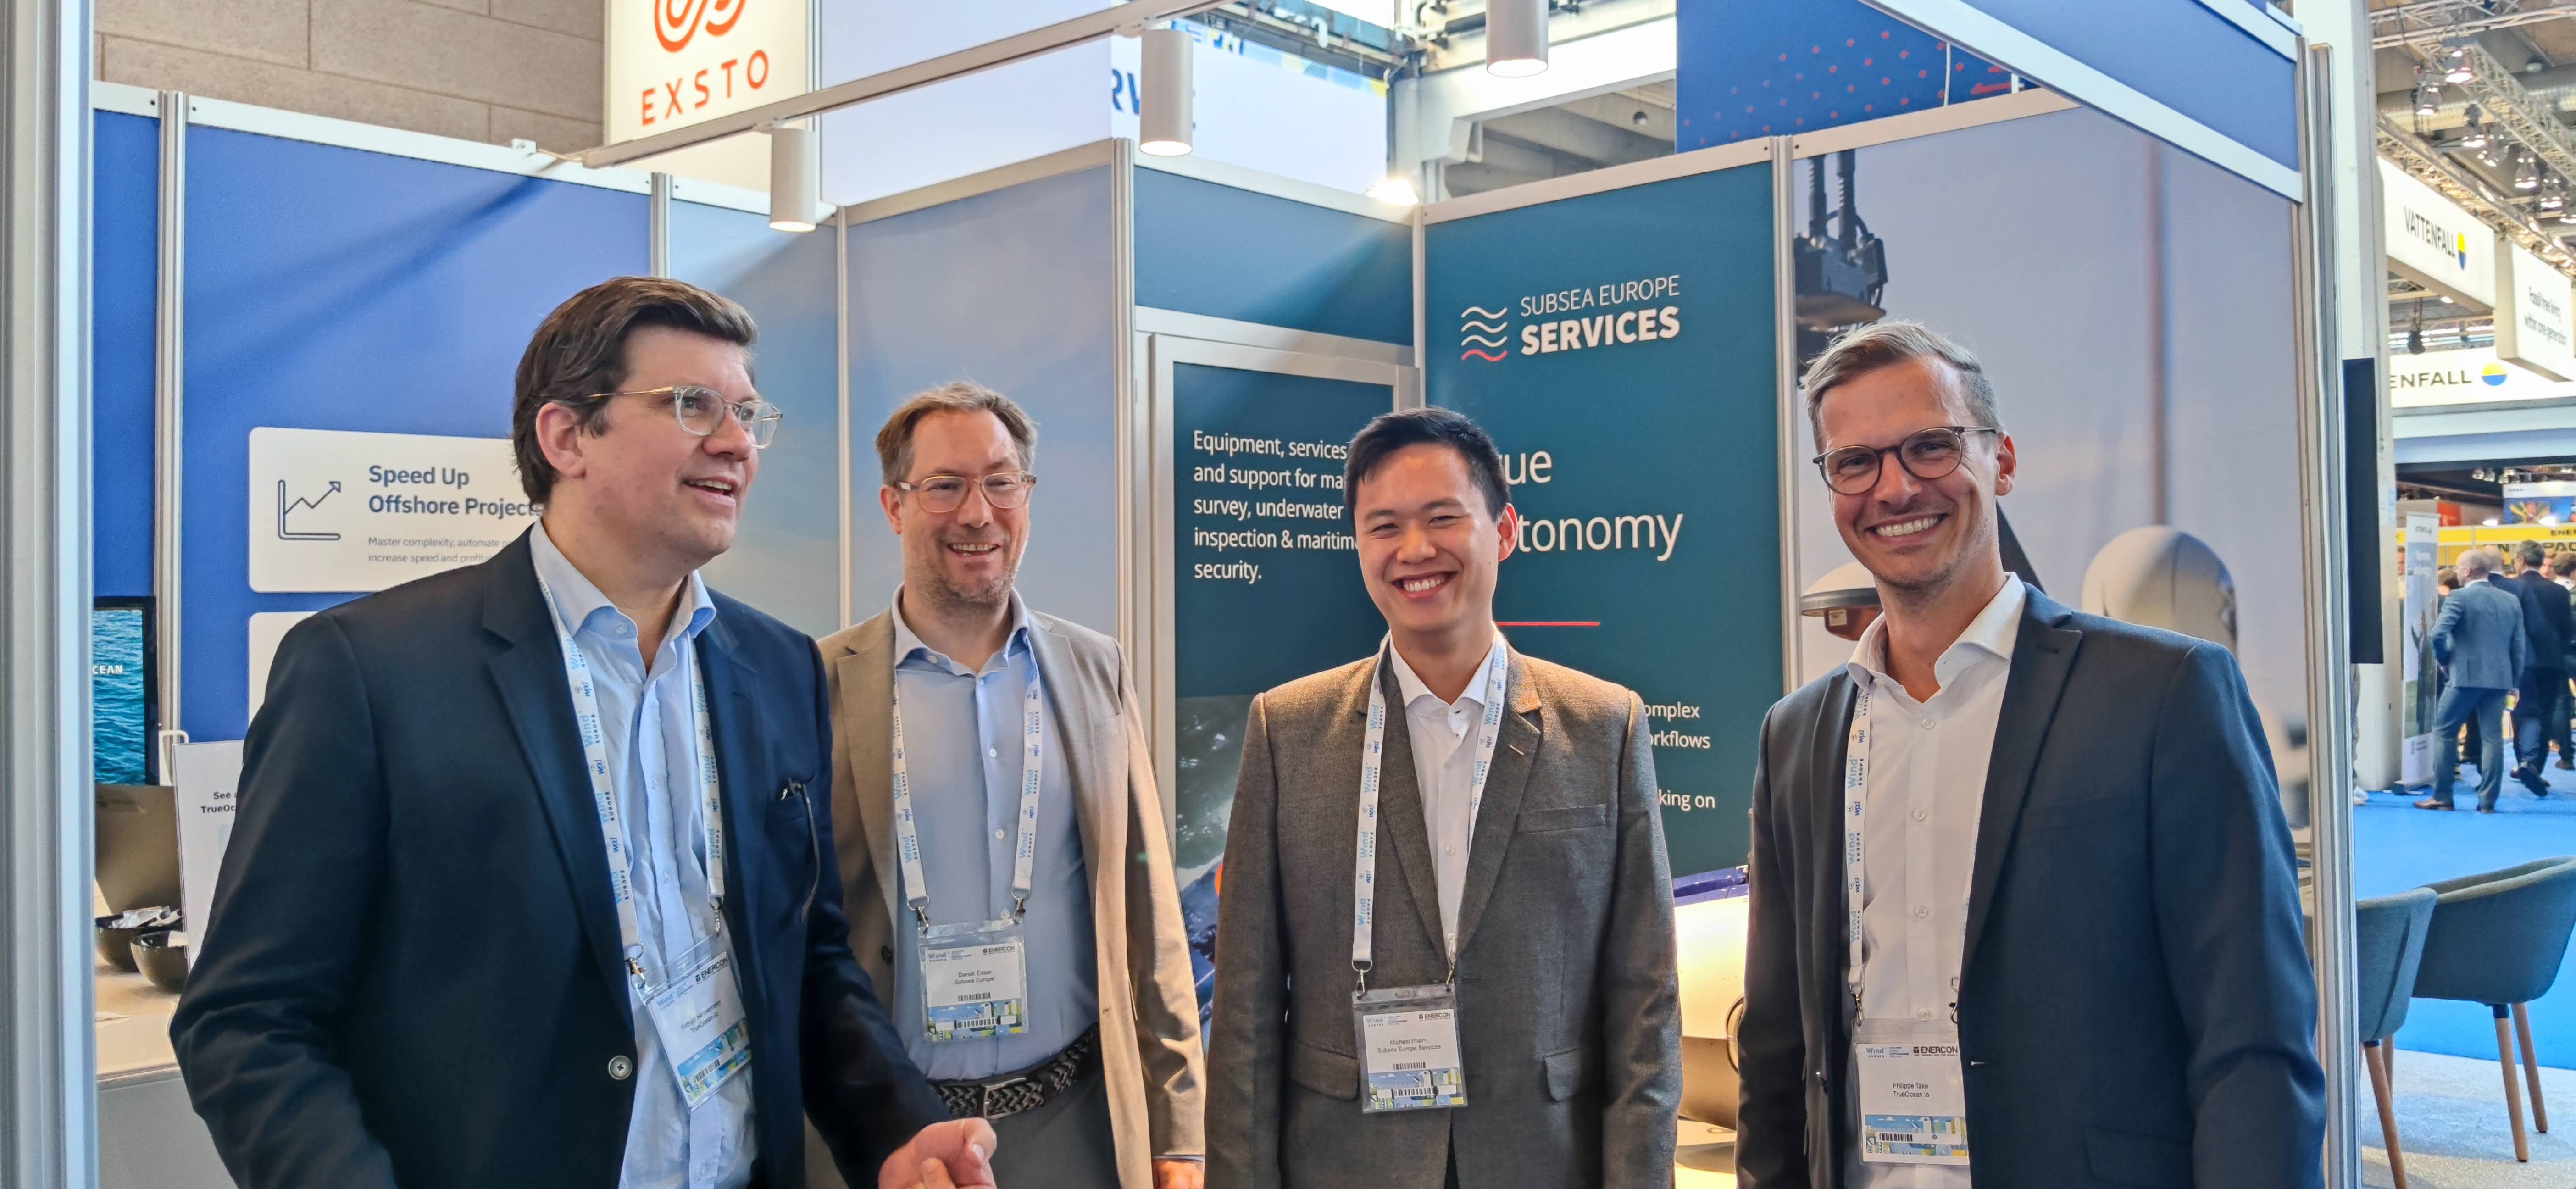 north.io team together with partner and customer Subsea Europe Services at WindEurope Annual Event